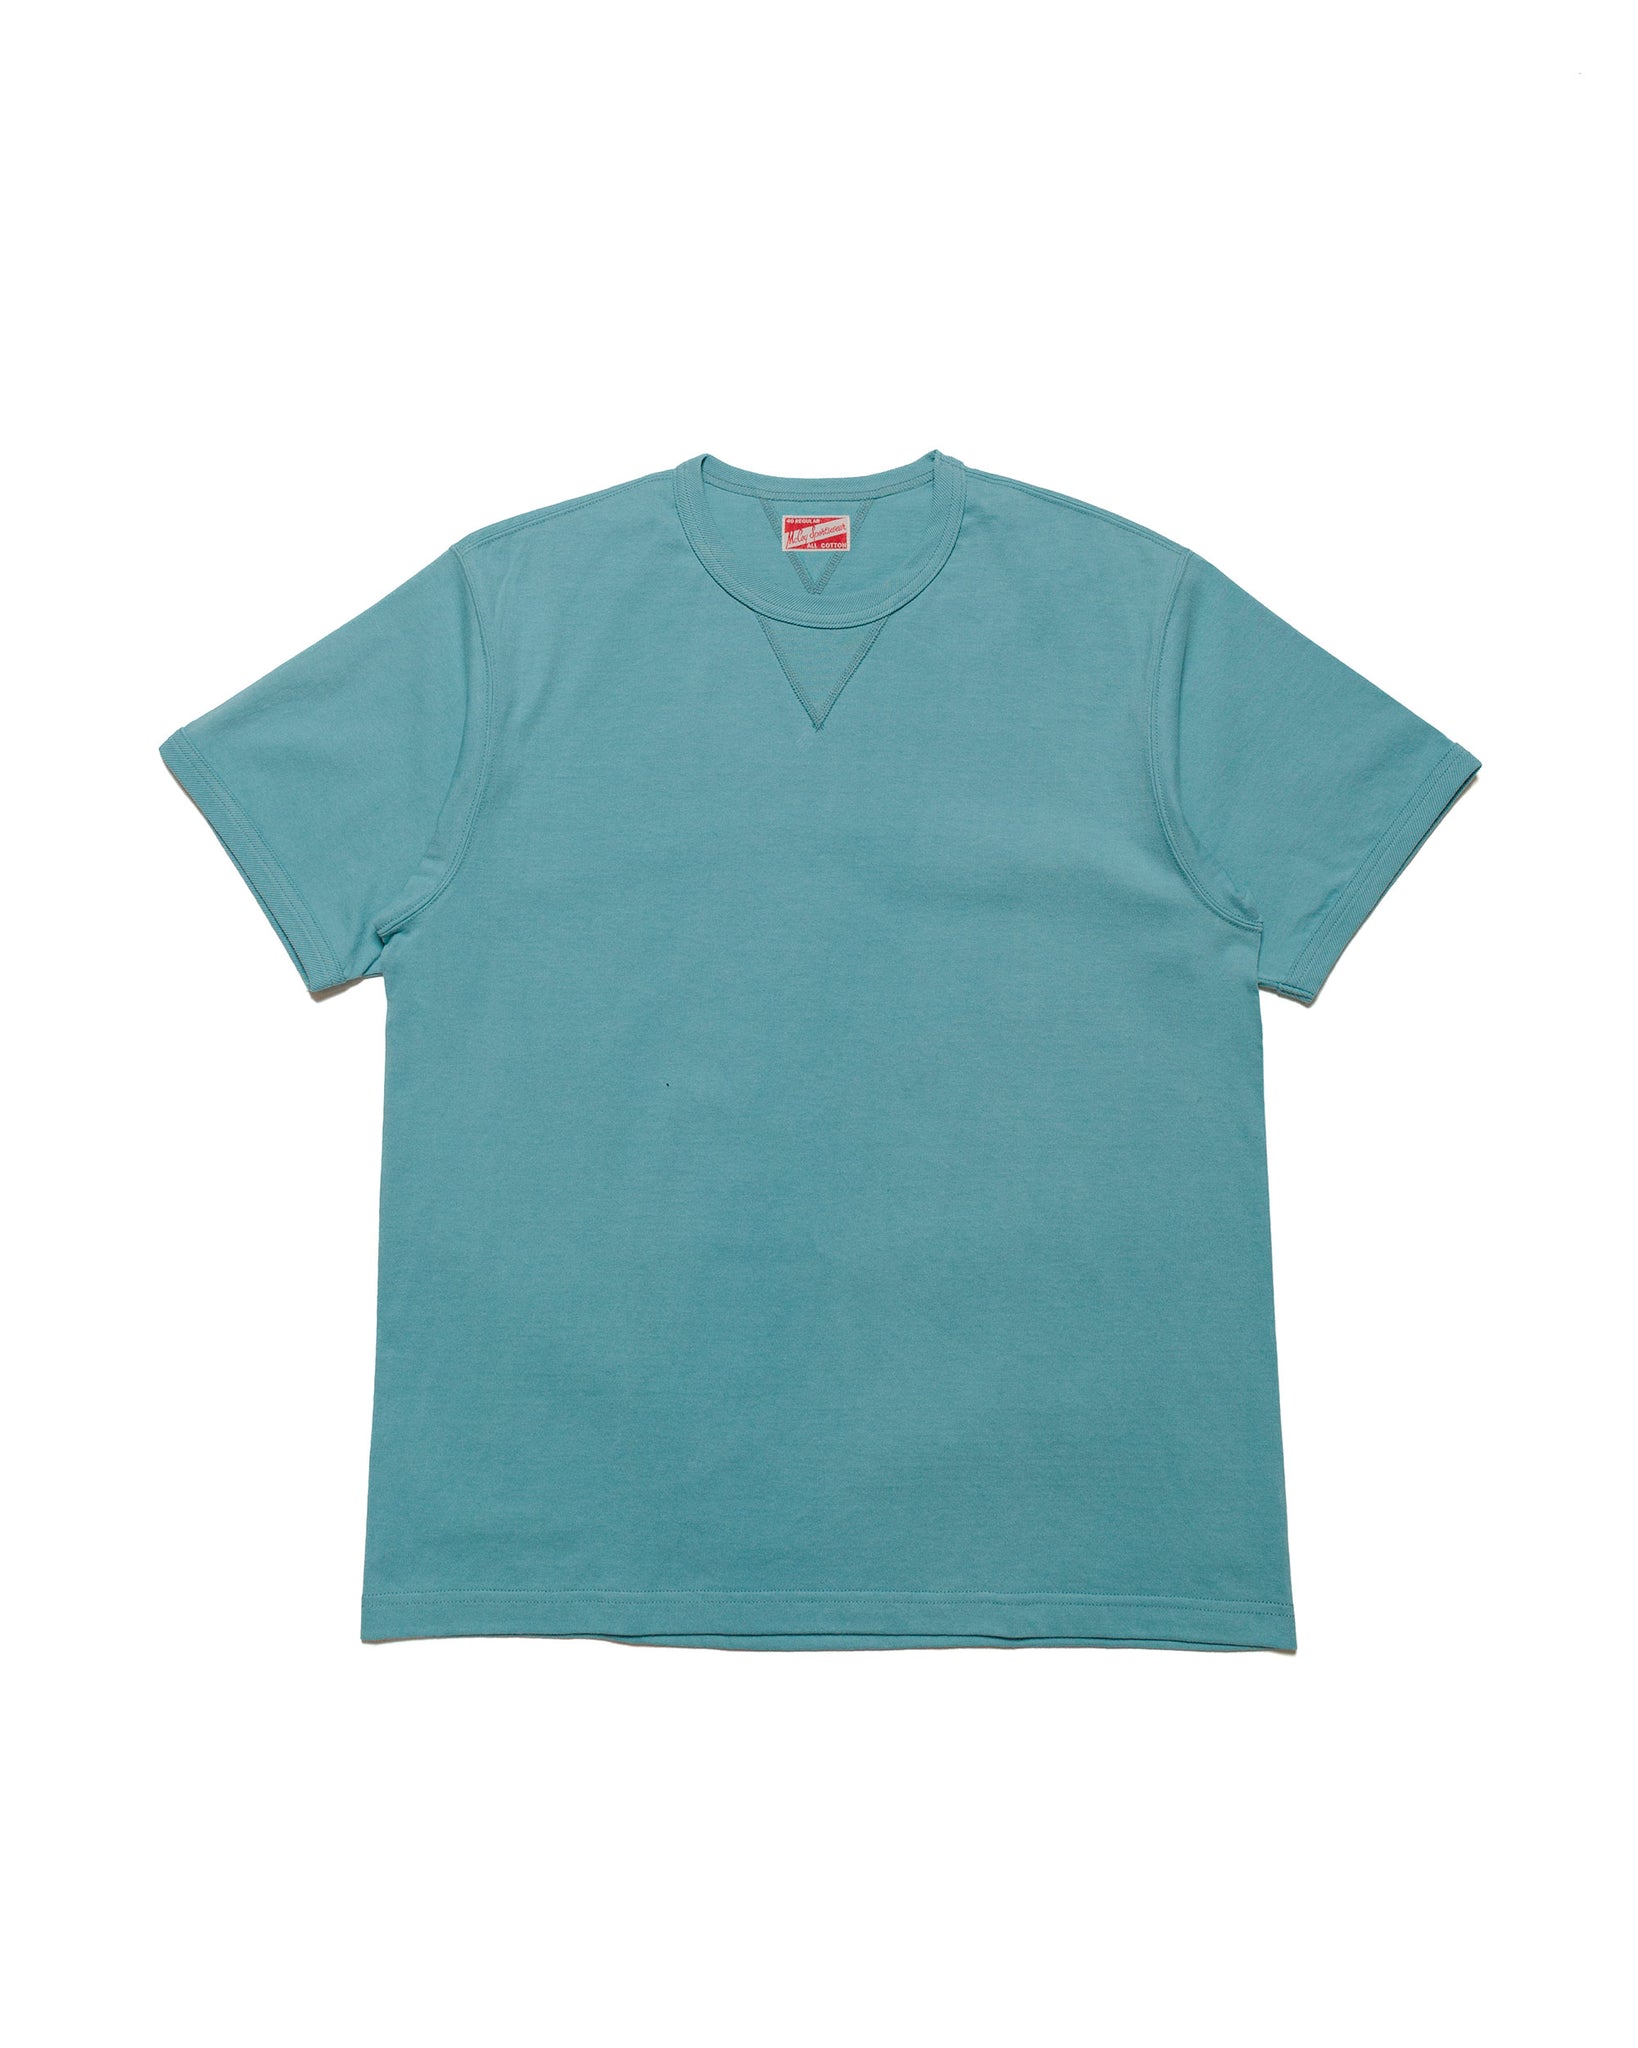 The Real McCoy's MC23020 Gusset Tee Teal